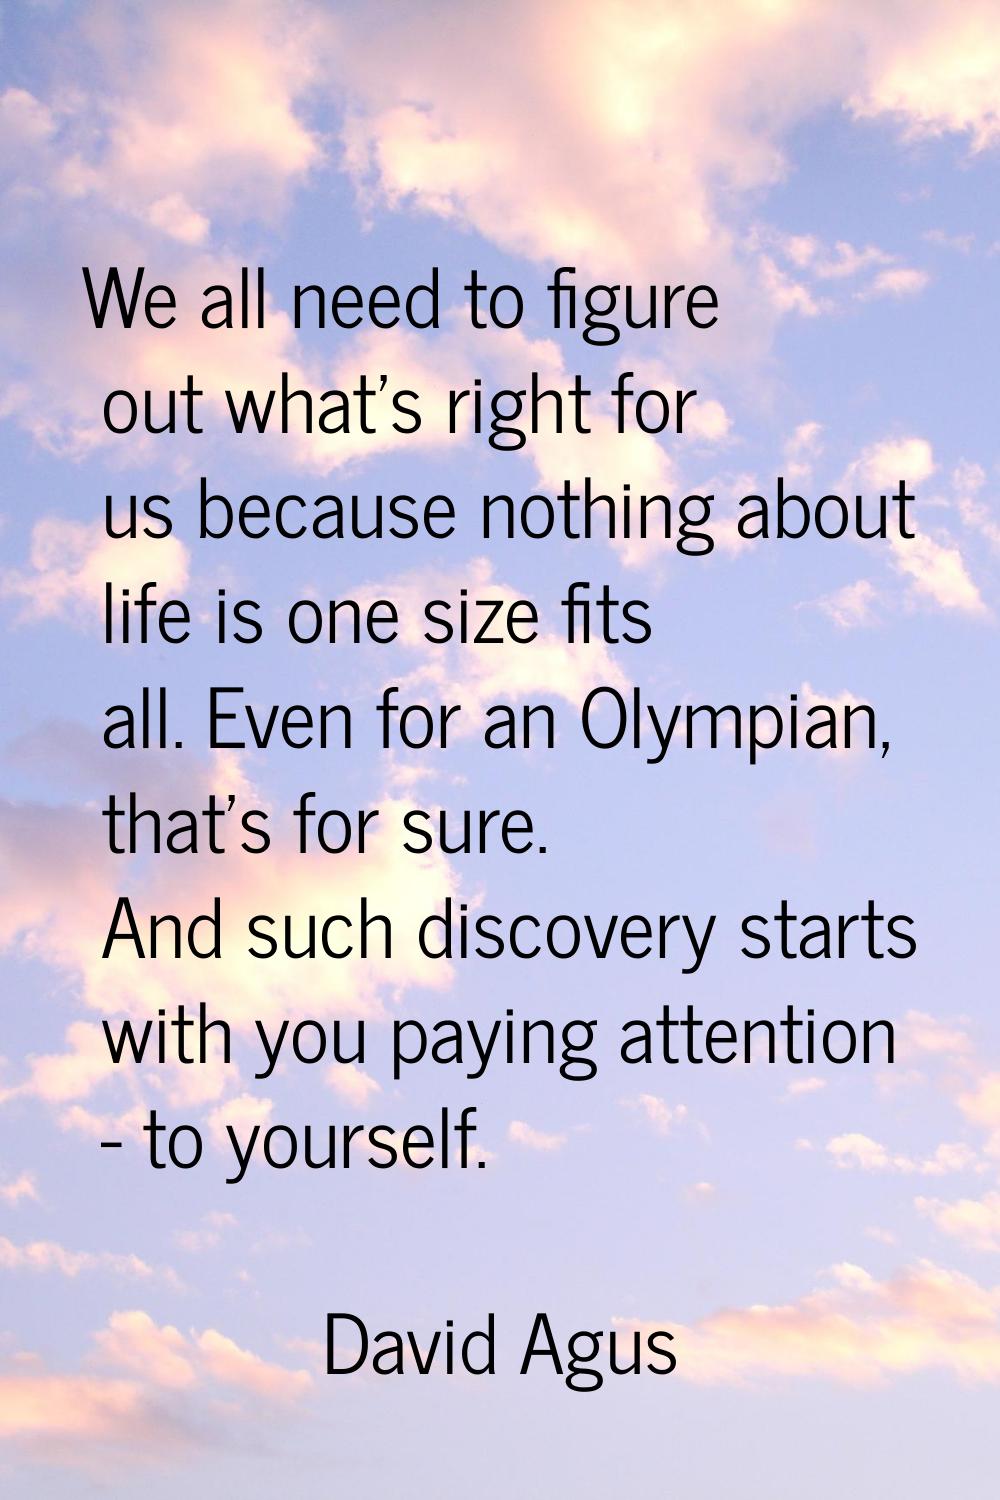 We all need to figure out what's right for us because nothing about life is one size fits all. Even